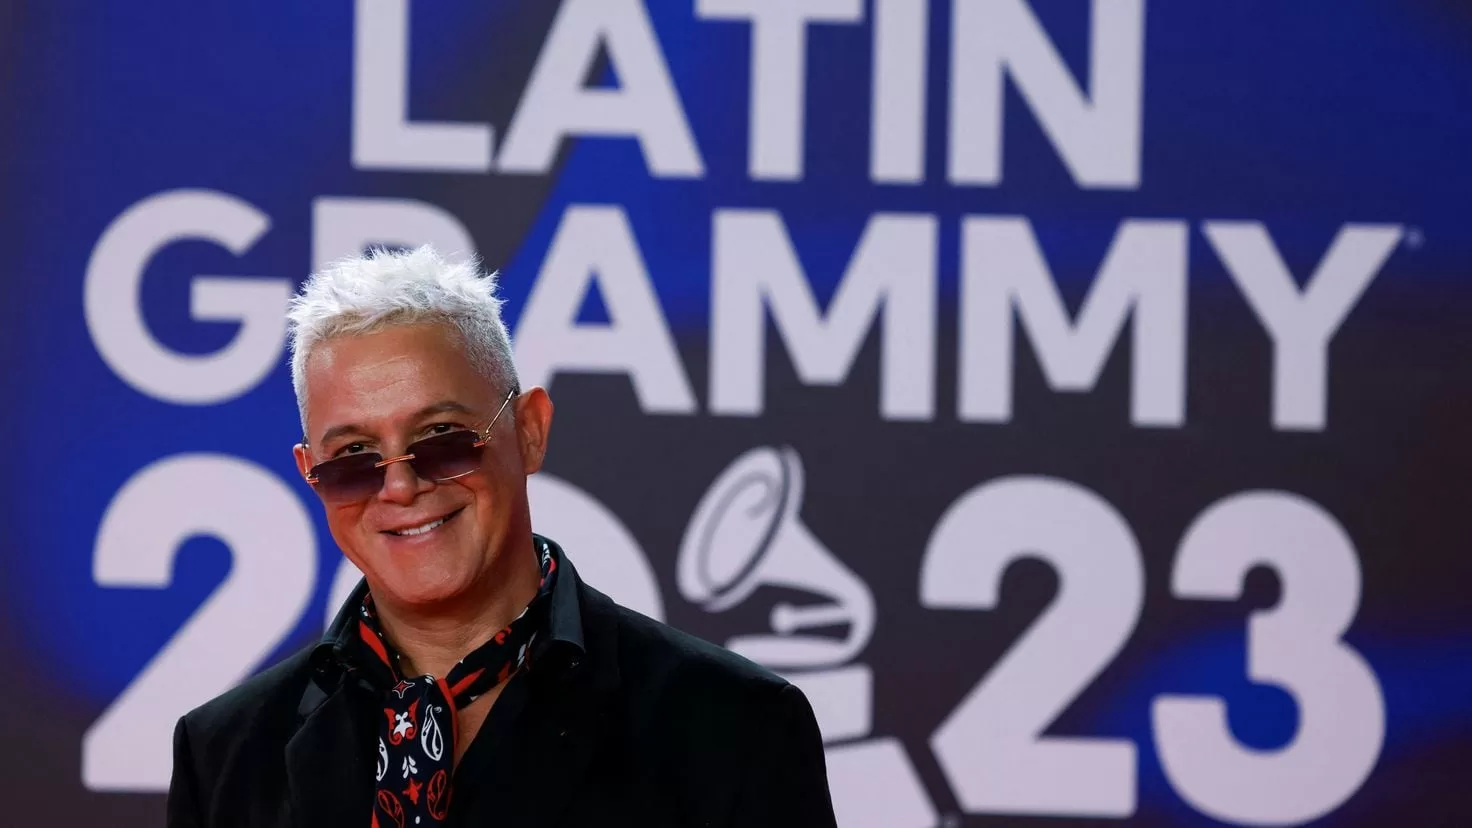 Latin Grammy Awards 2023, live: delivery gala and all performances, live
